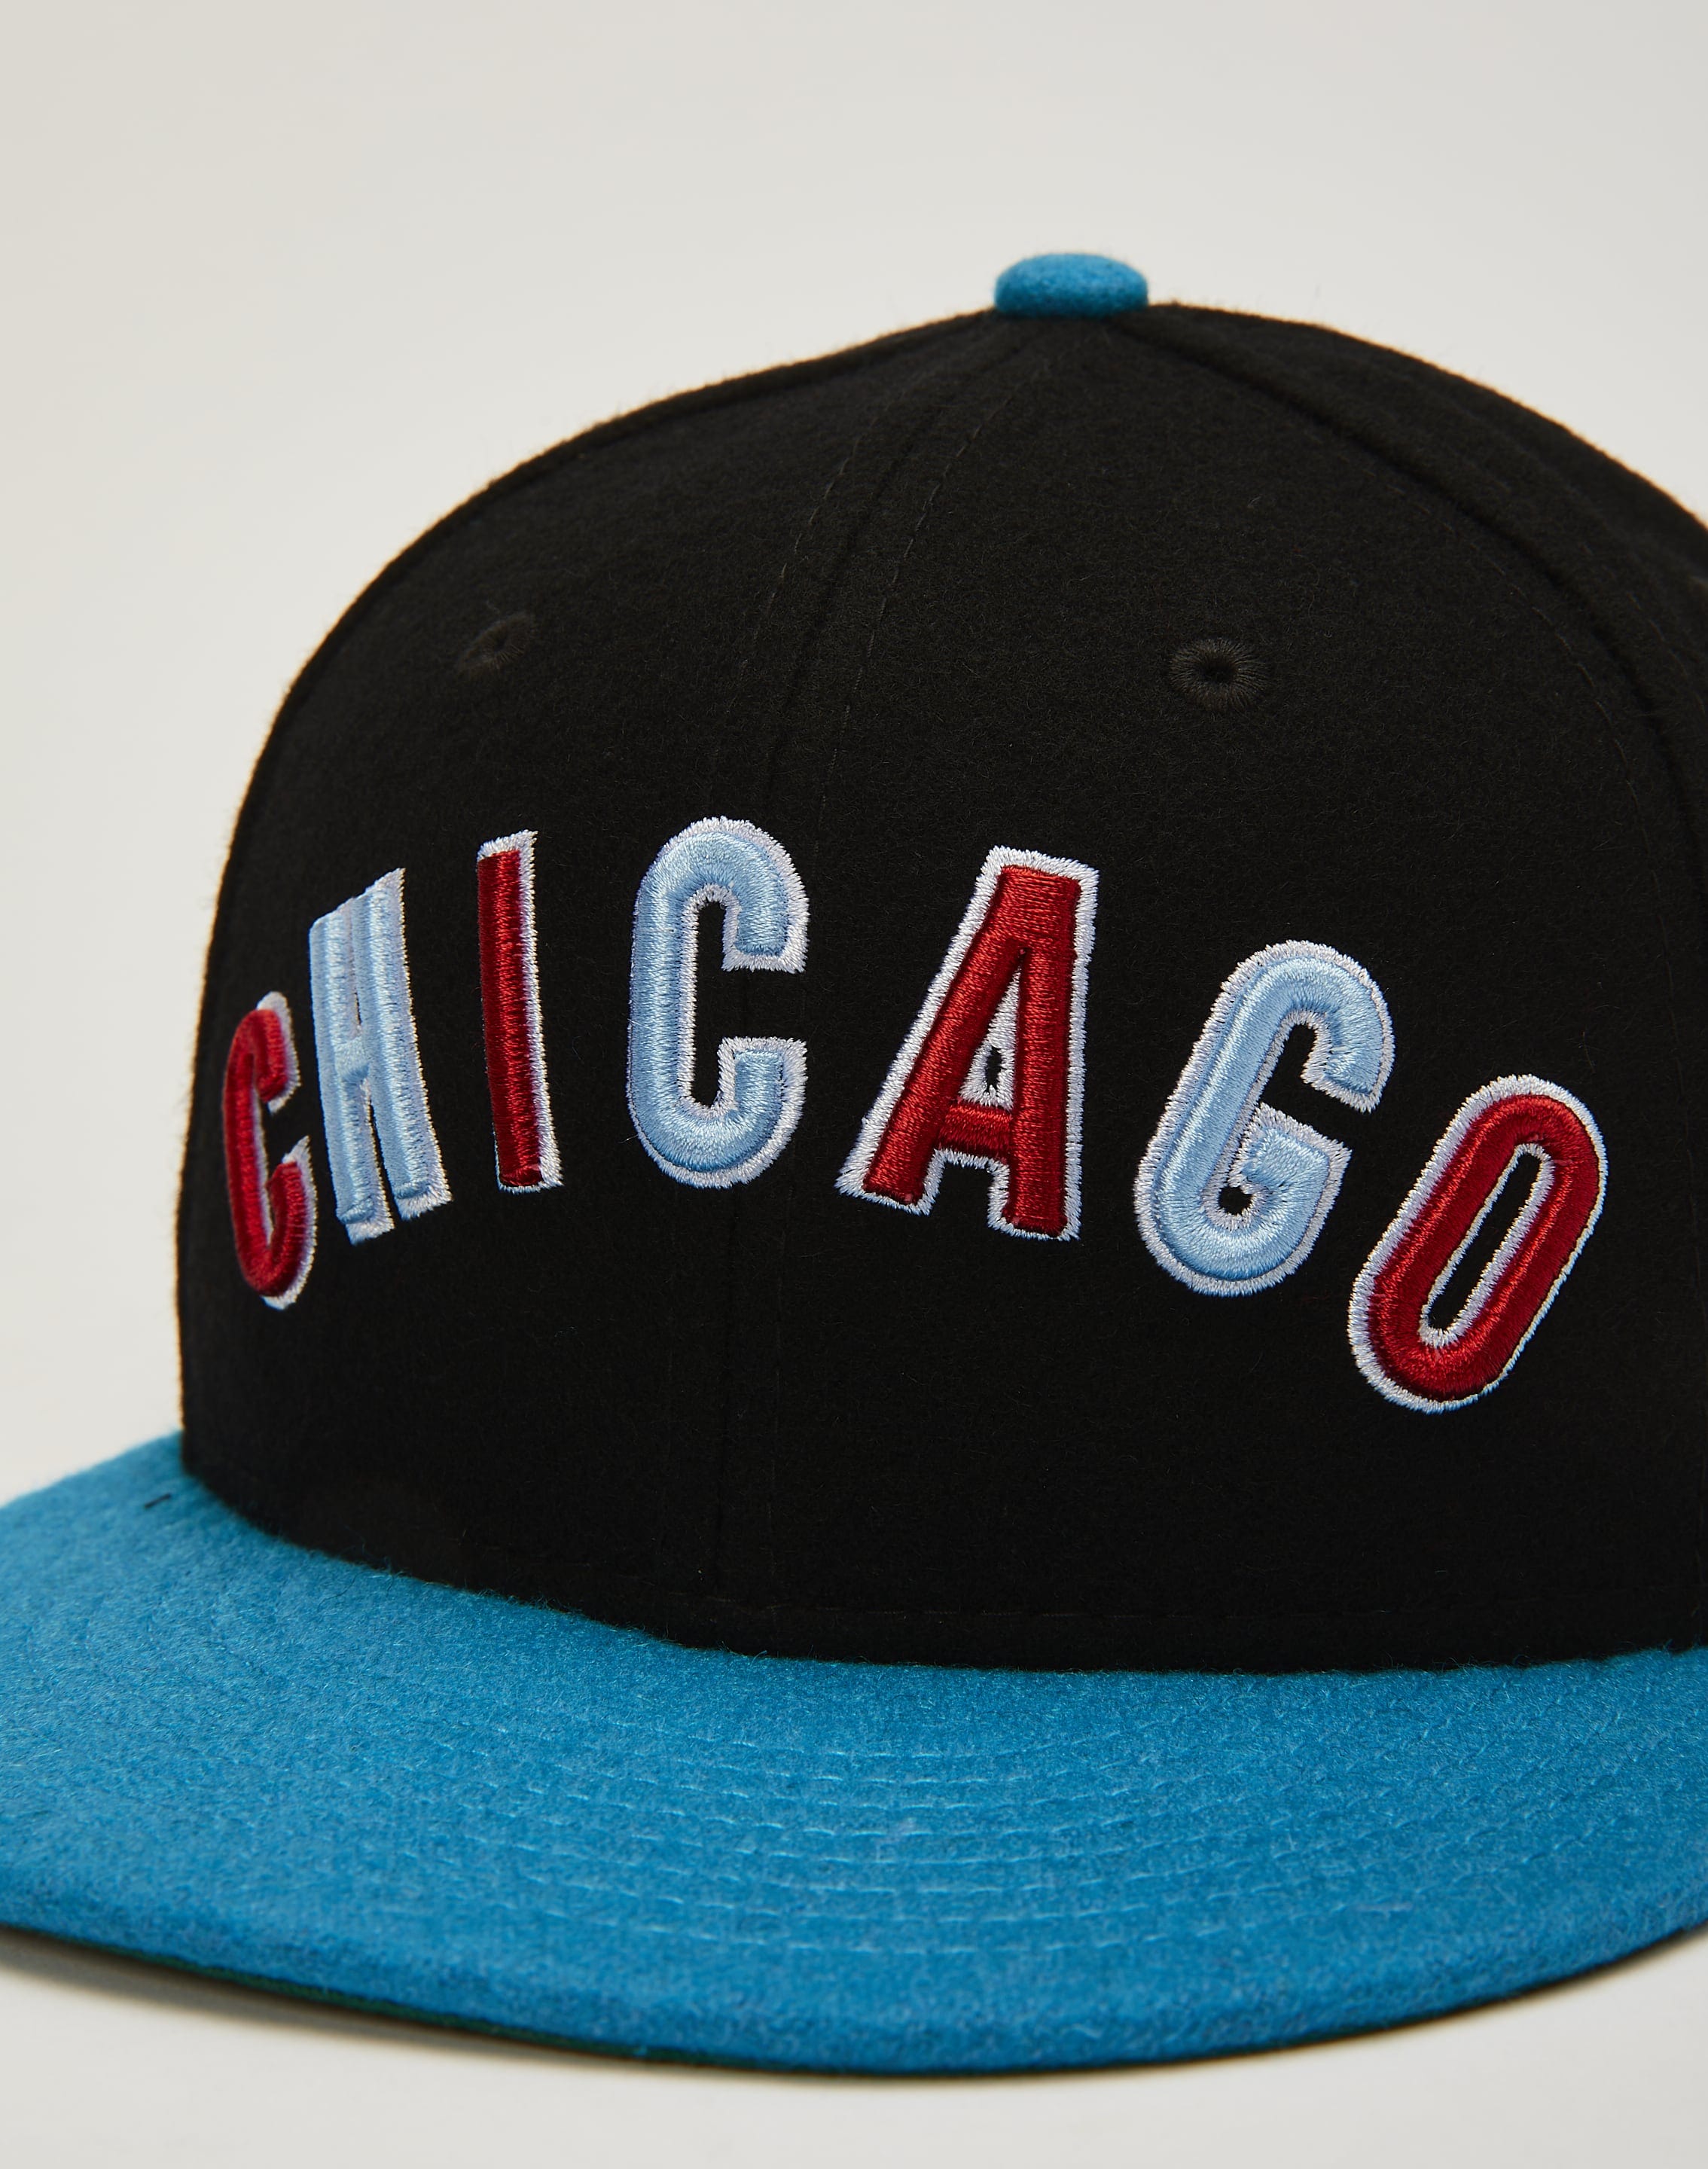 New Era 59Fifty Chicago Cubs Purple Fitted Hat – 402Fitted